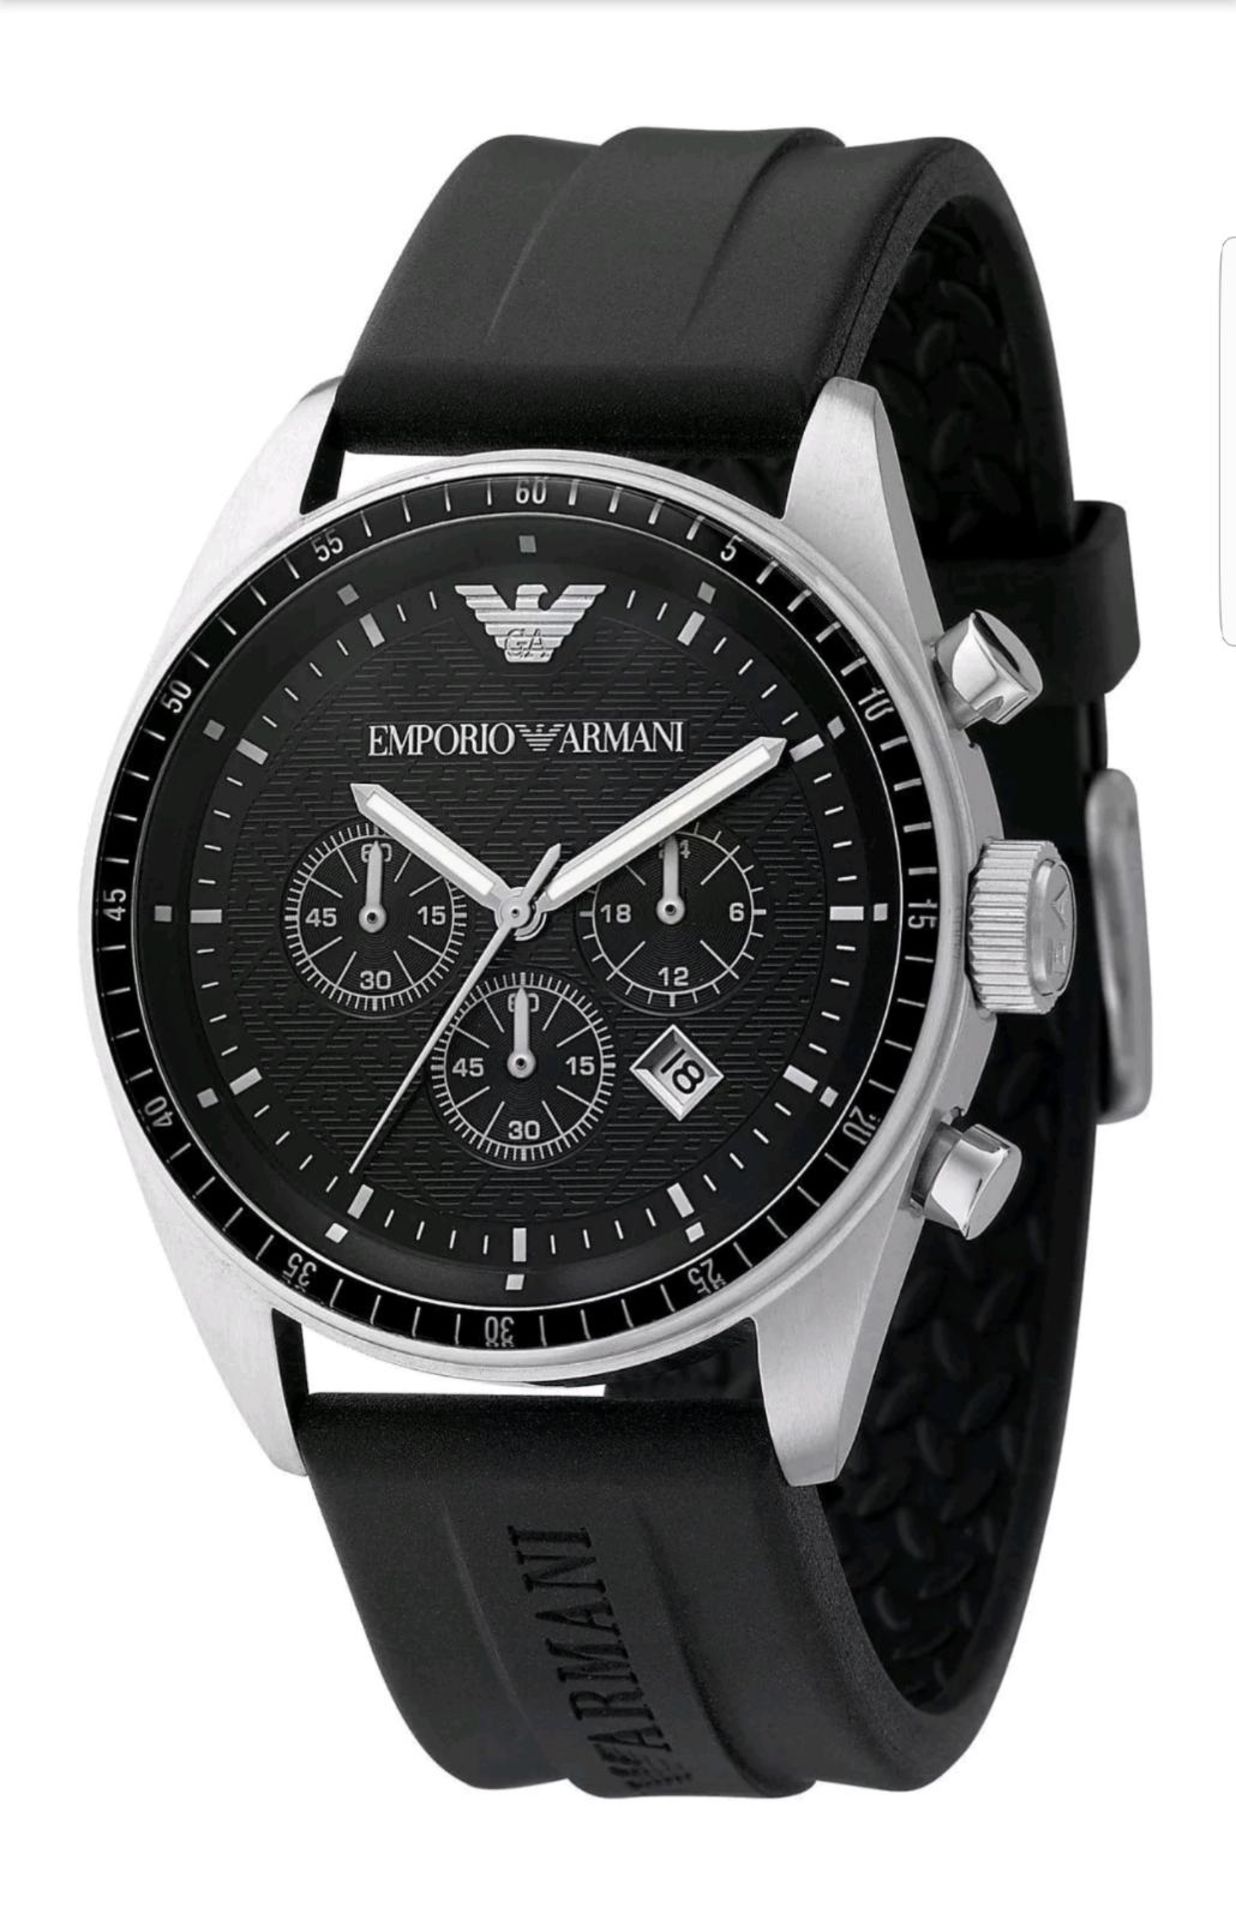 BRAND NEW GENTS EMPORIO ARMANI AR0527, COMPLETE WITH ORIGINAL ARMANI BOX, MANUAL, TAGS AND